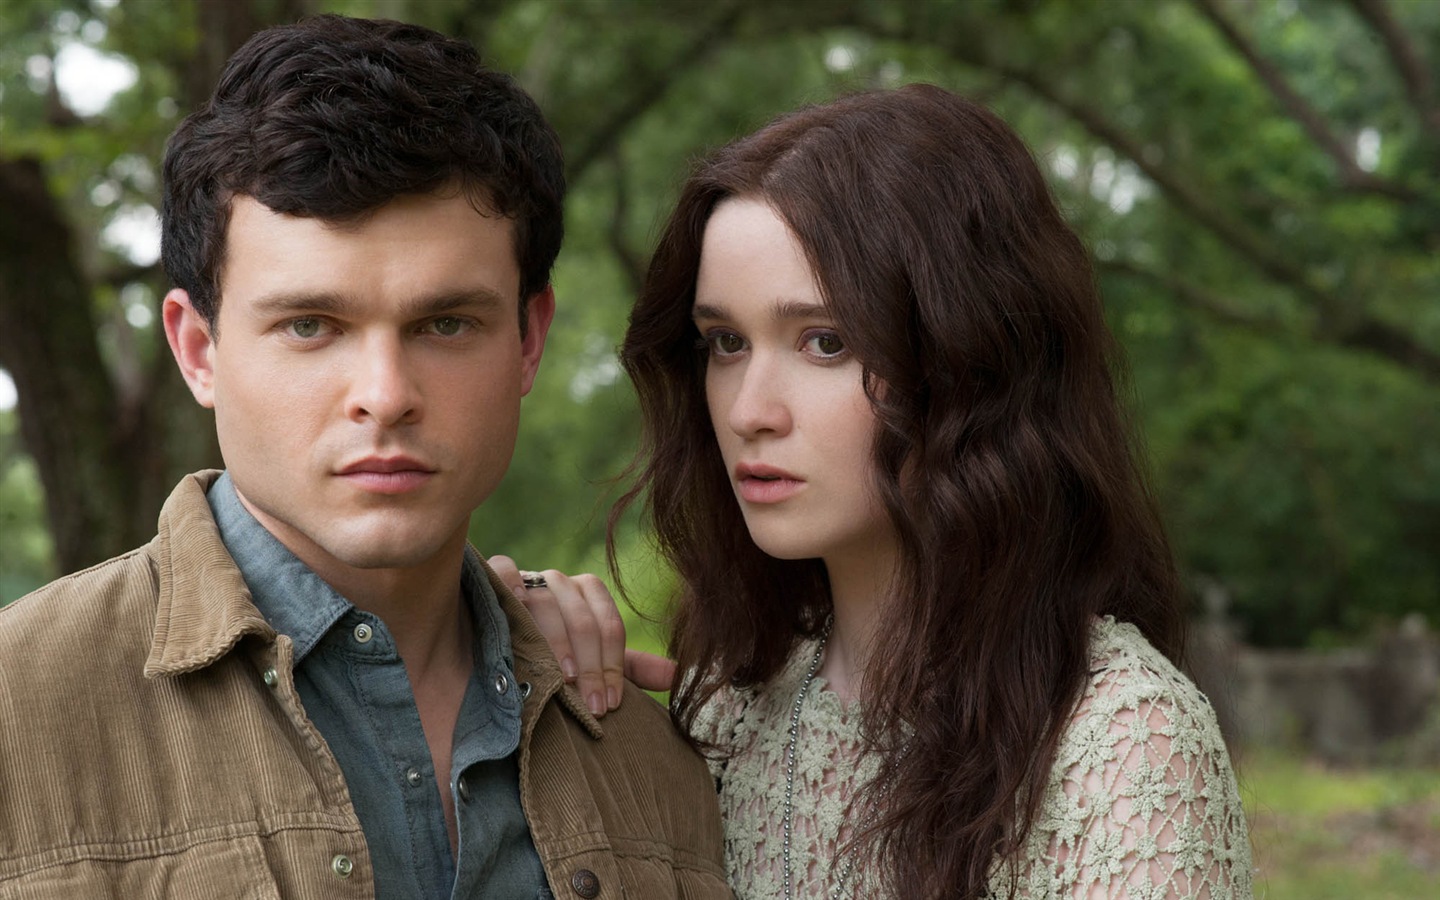 Beautiful Creatures 2013 HD movie wallpapers #8 - 1440x900